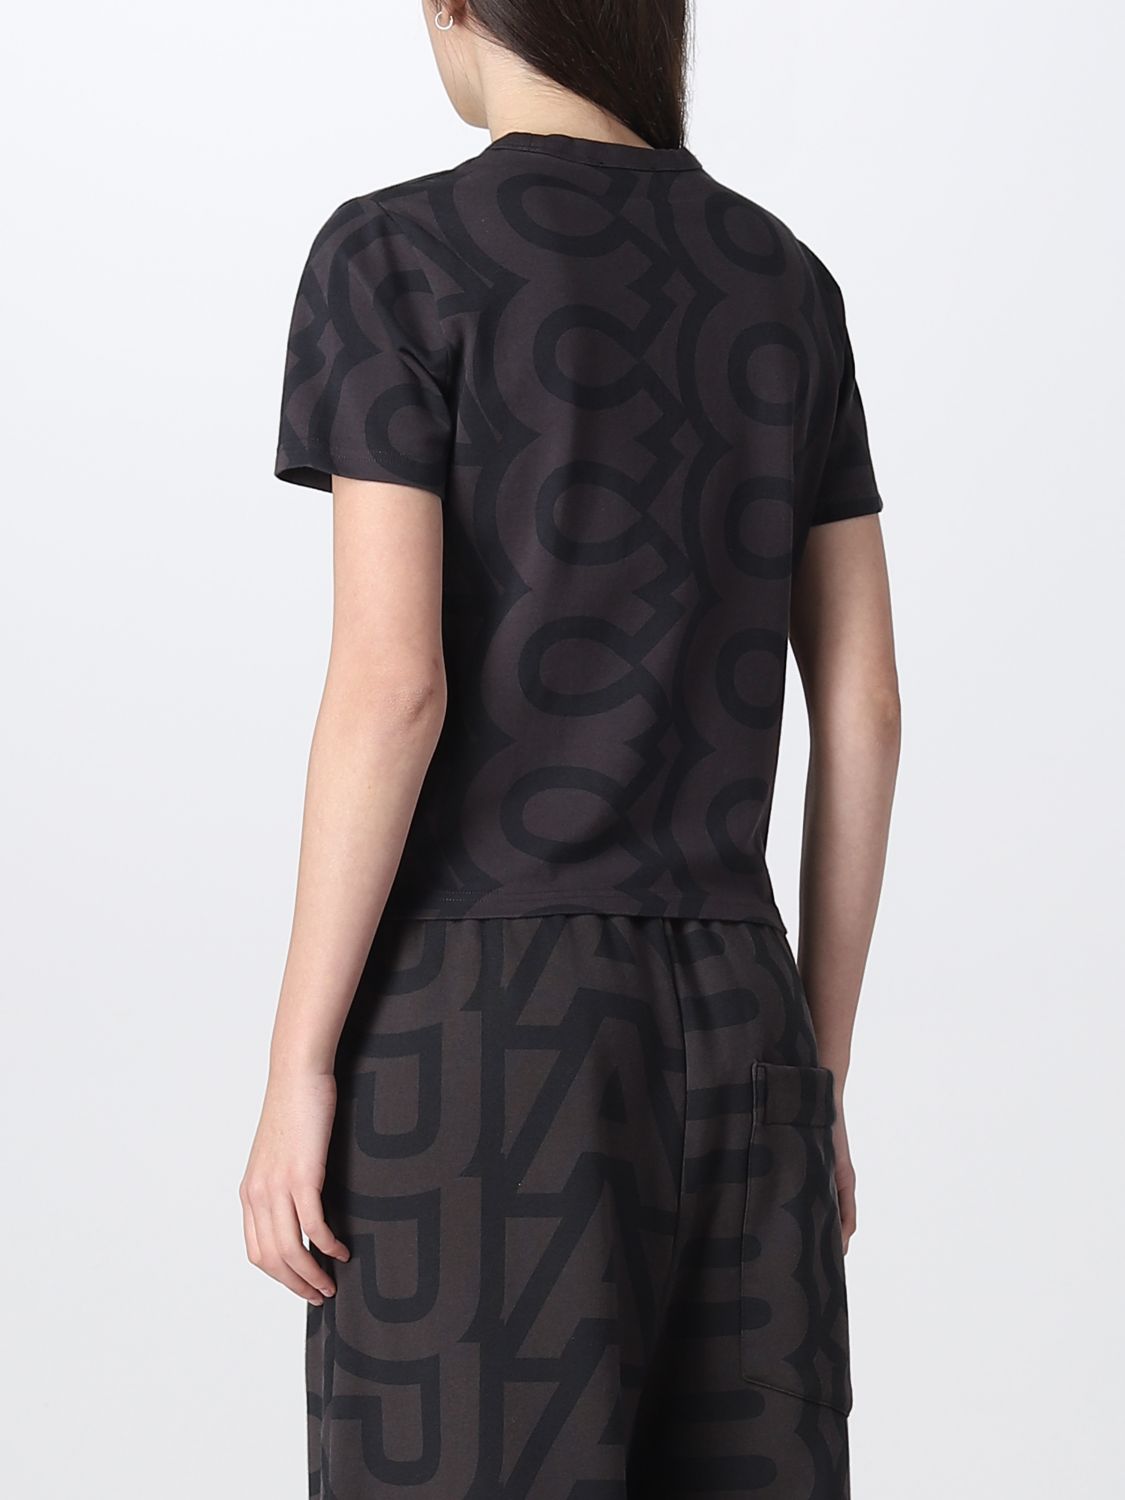 T-shirt Marc Jacobs: T-shirt Marc Jacobs in cotone con logo all over nero 3